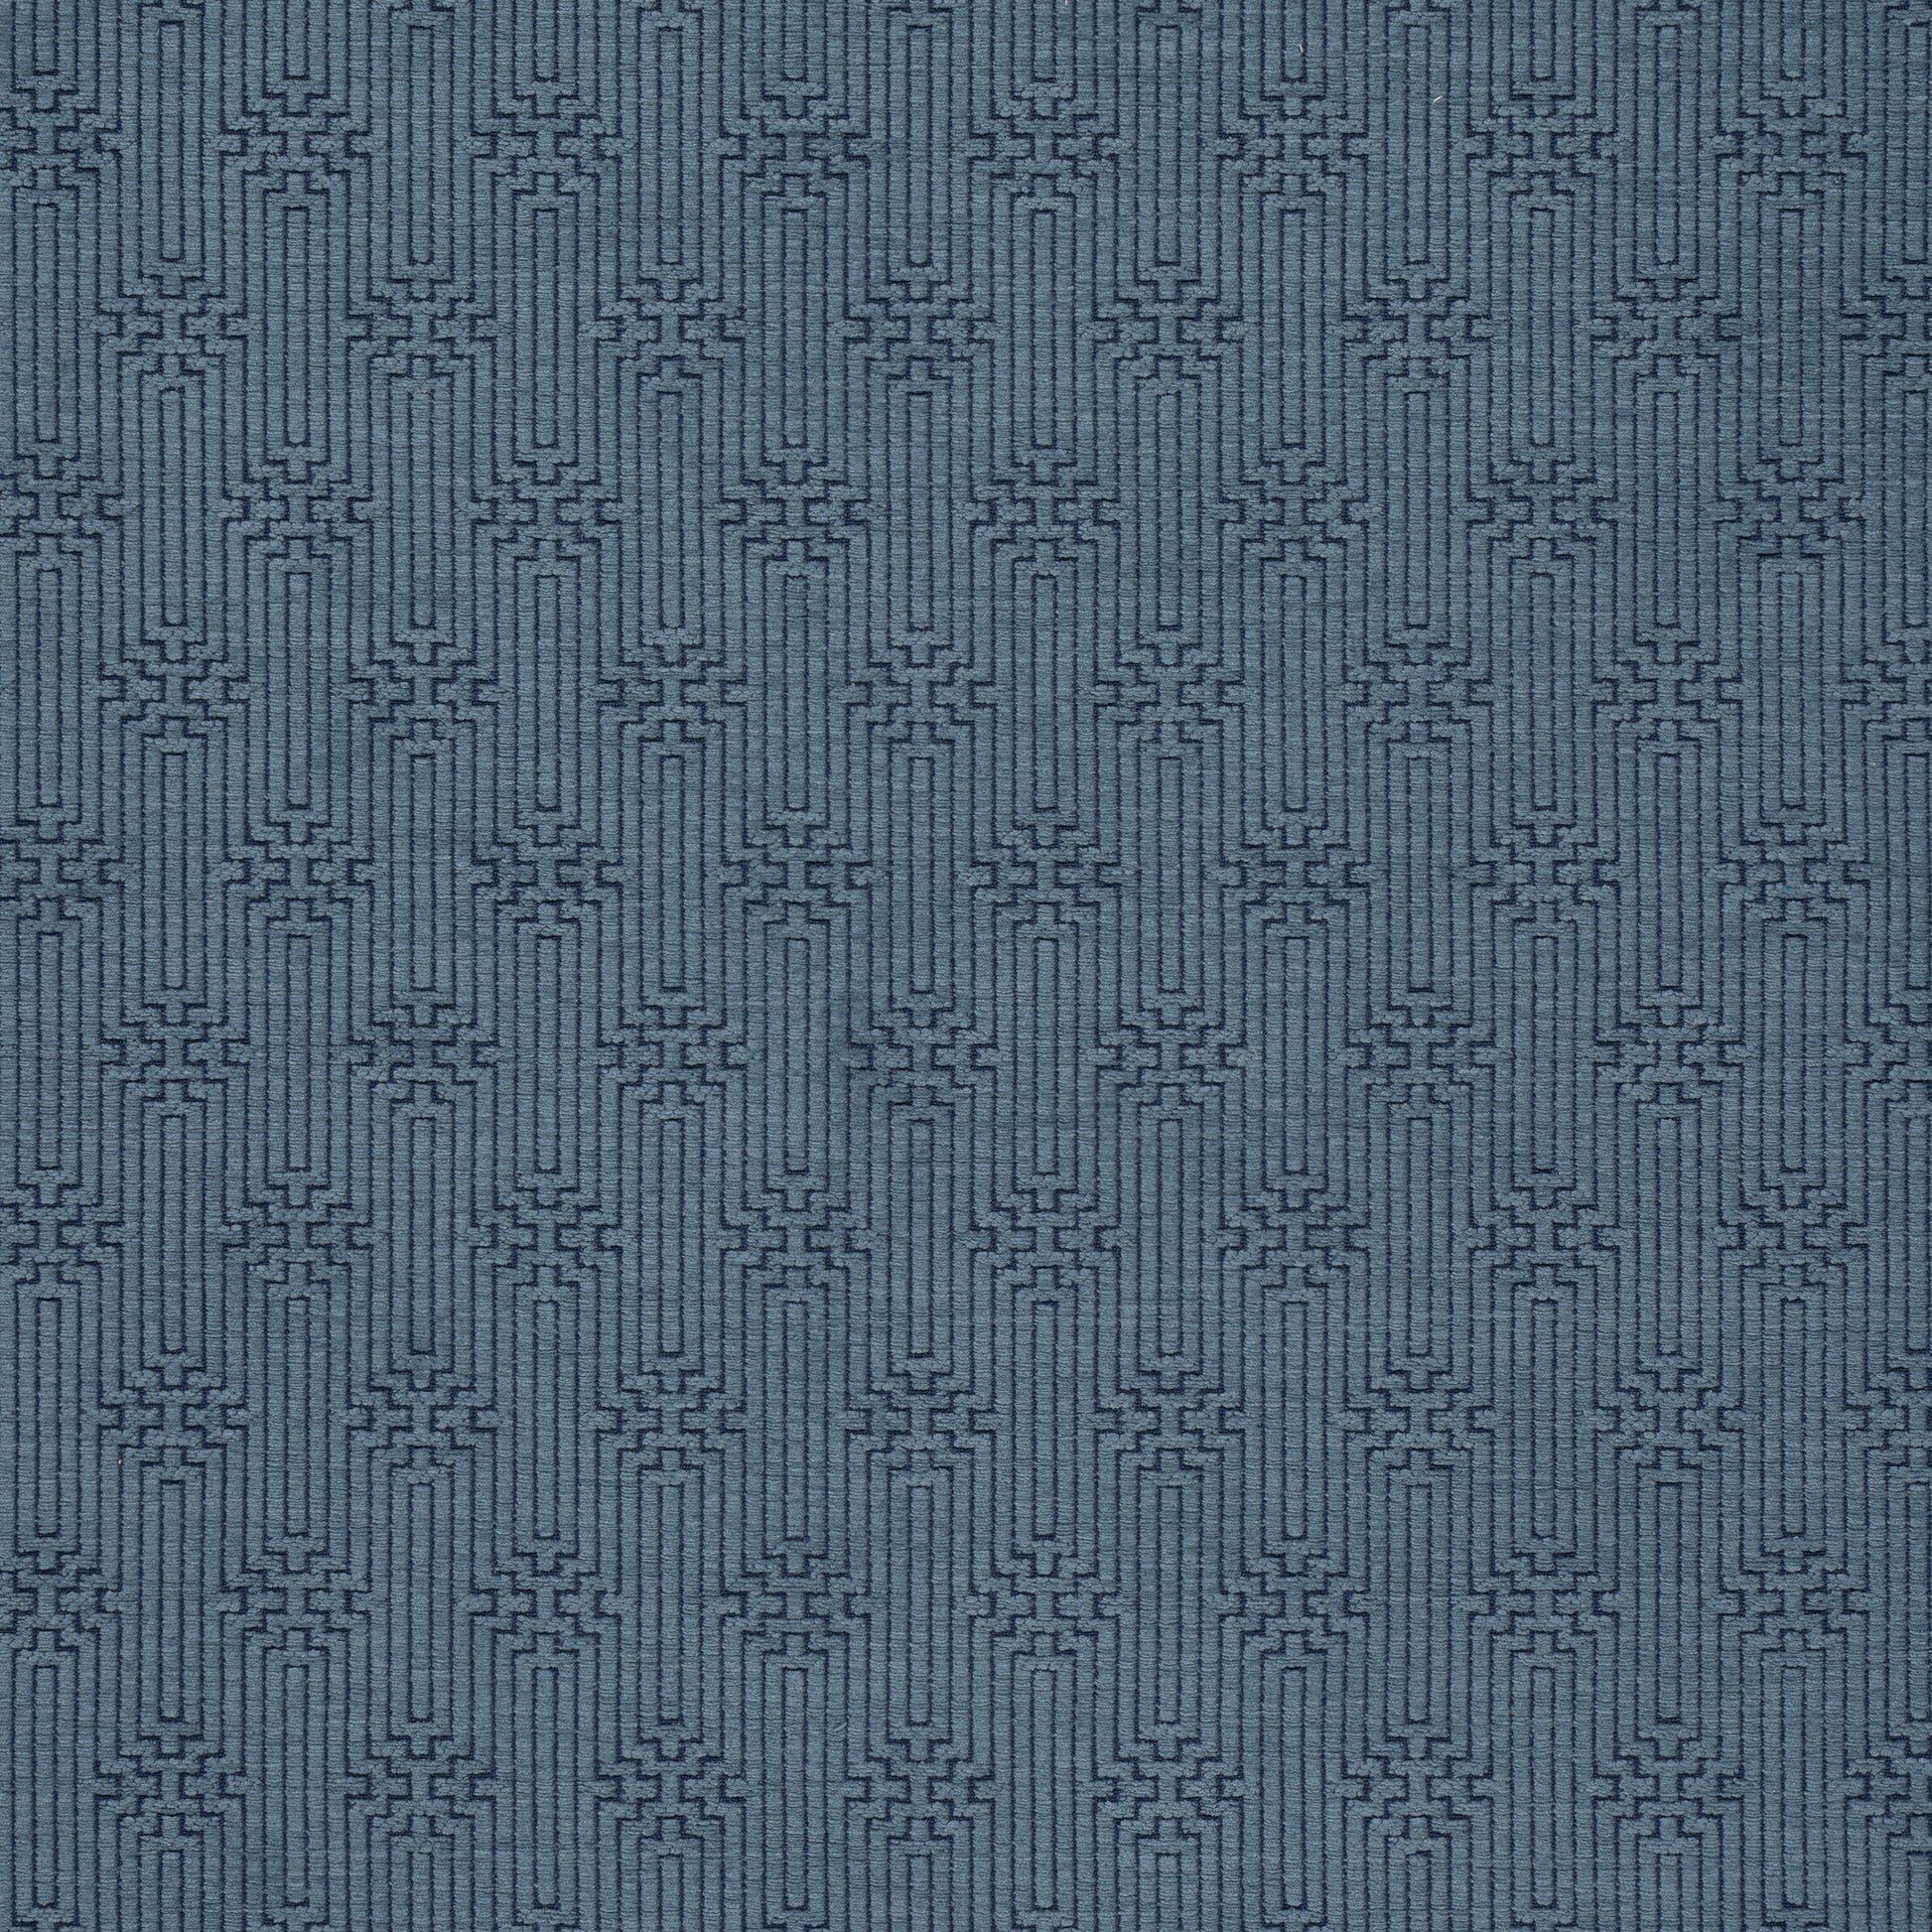 Purchase Thibaut Fabric Pattern# W74210 pattern name Crete color Blue